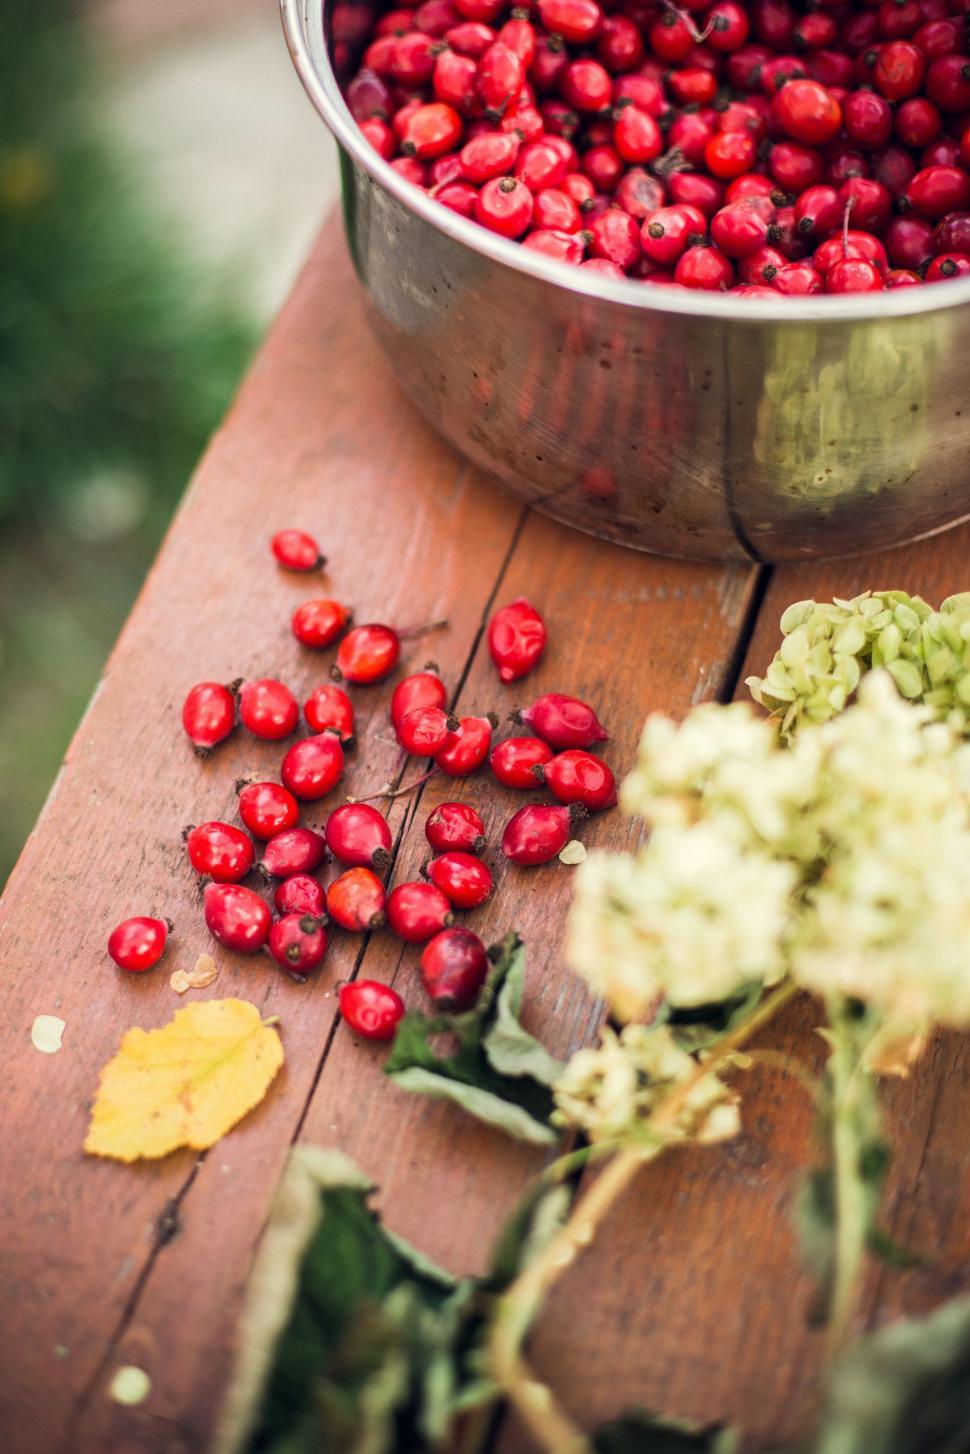 Free Image of Red Berries on Wooden Table  